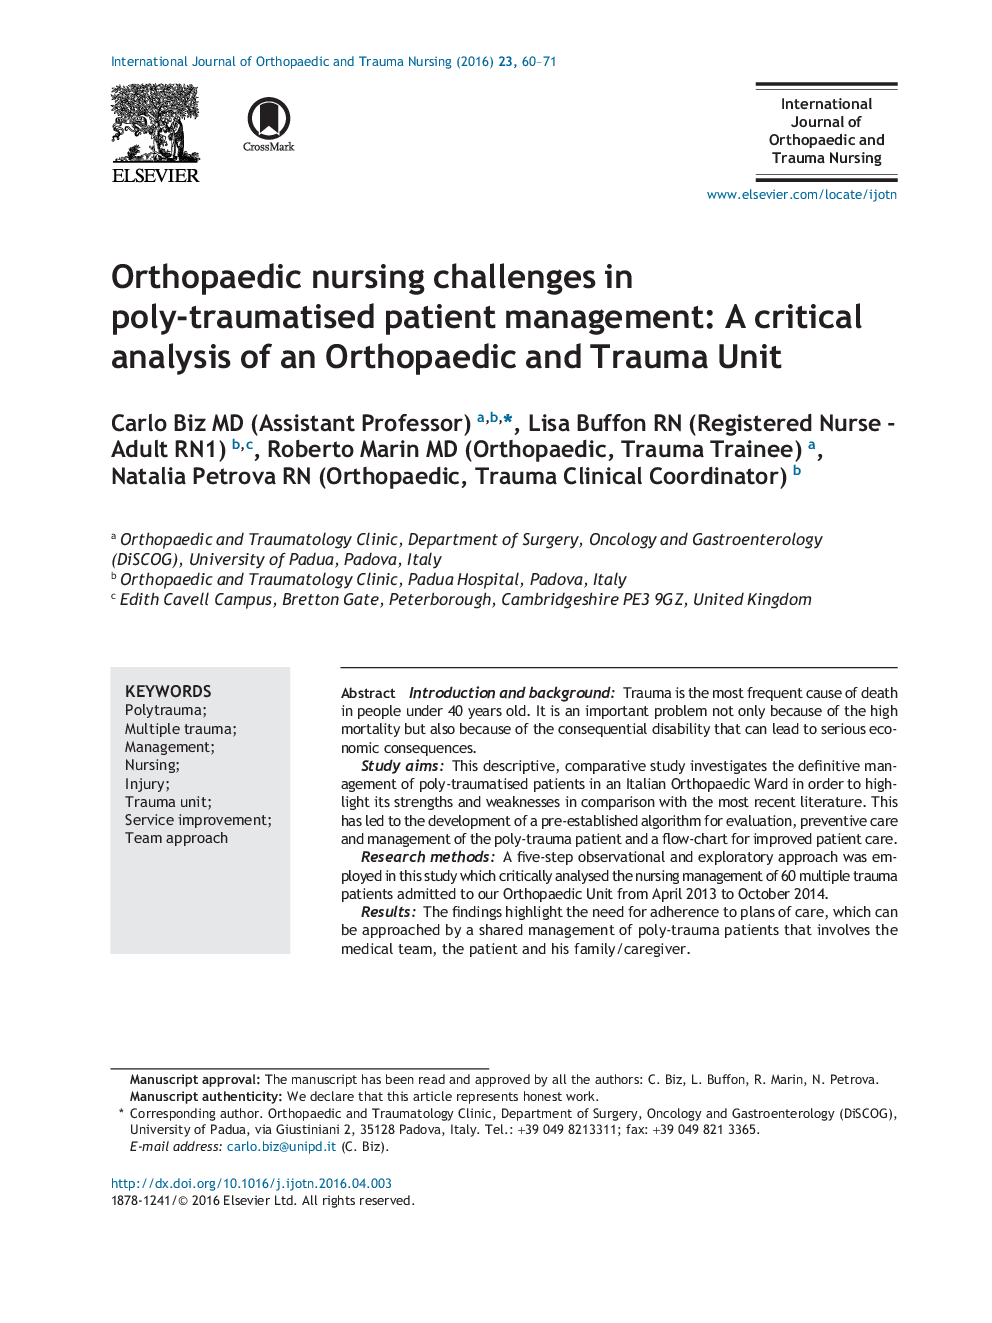 Orthopaedic nursing challenges in poly-traumatised patient management: A critical analysis of an Orthopaedic and Trauma Unit